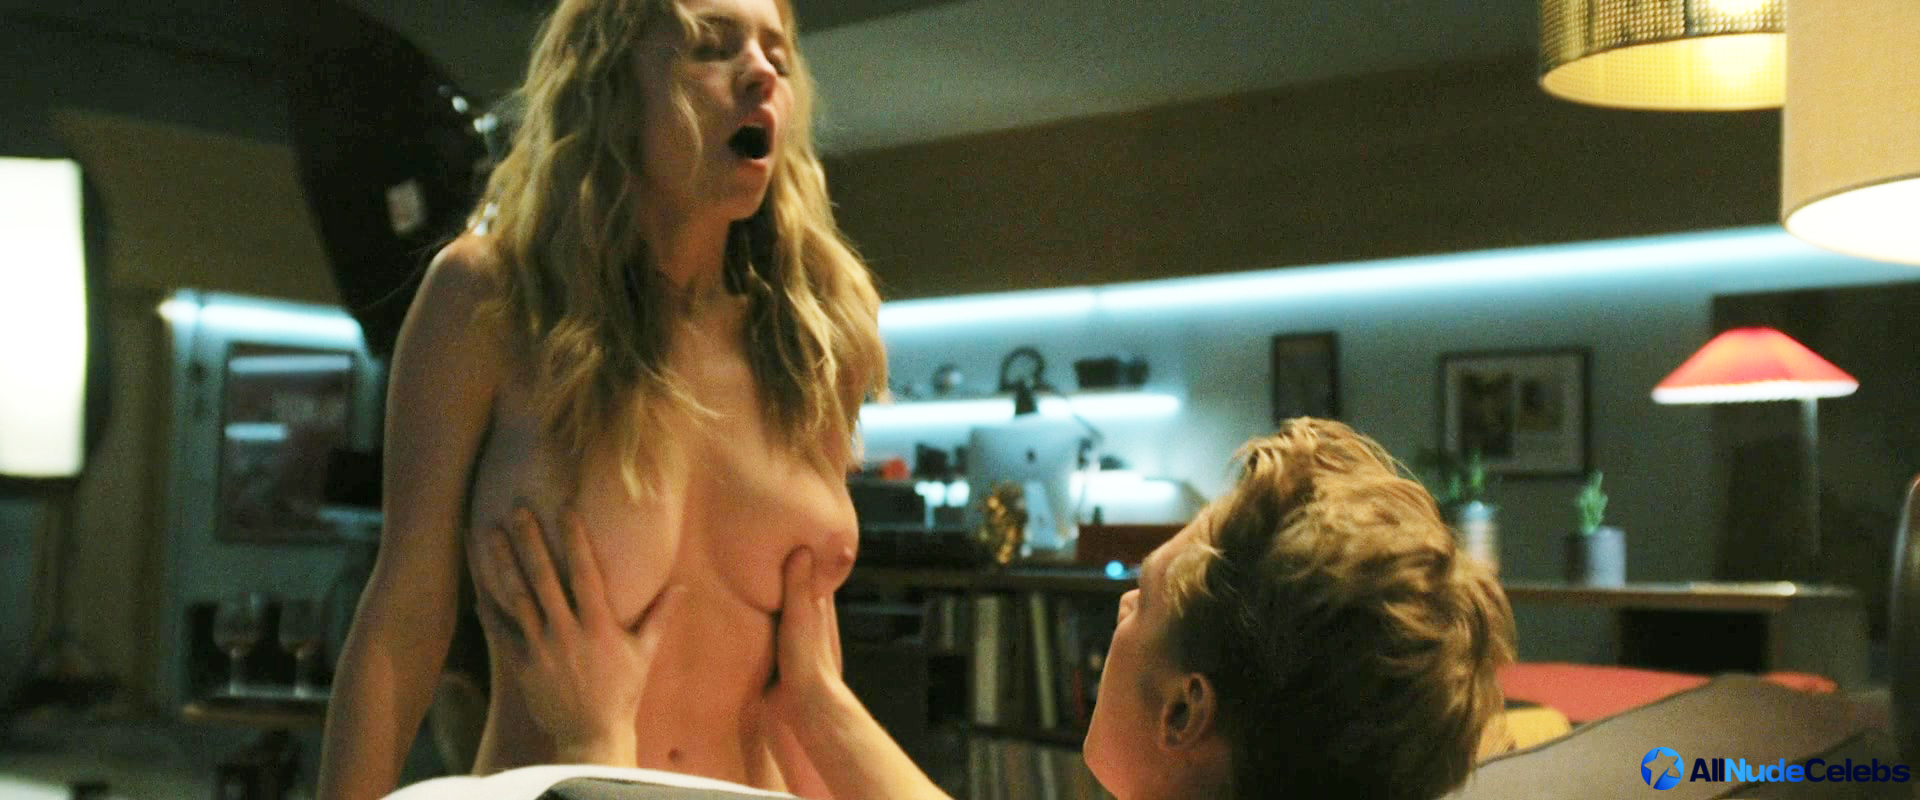 Especially Sydney Sweeney, who played nude there. 